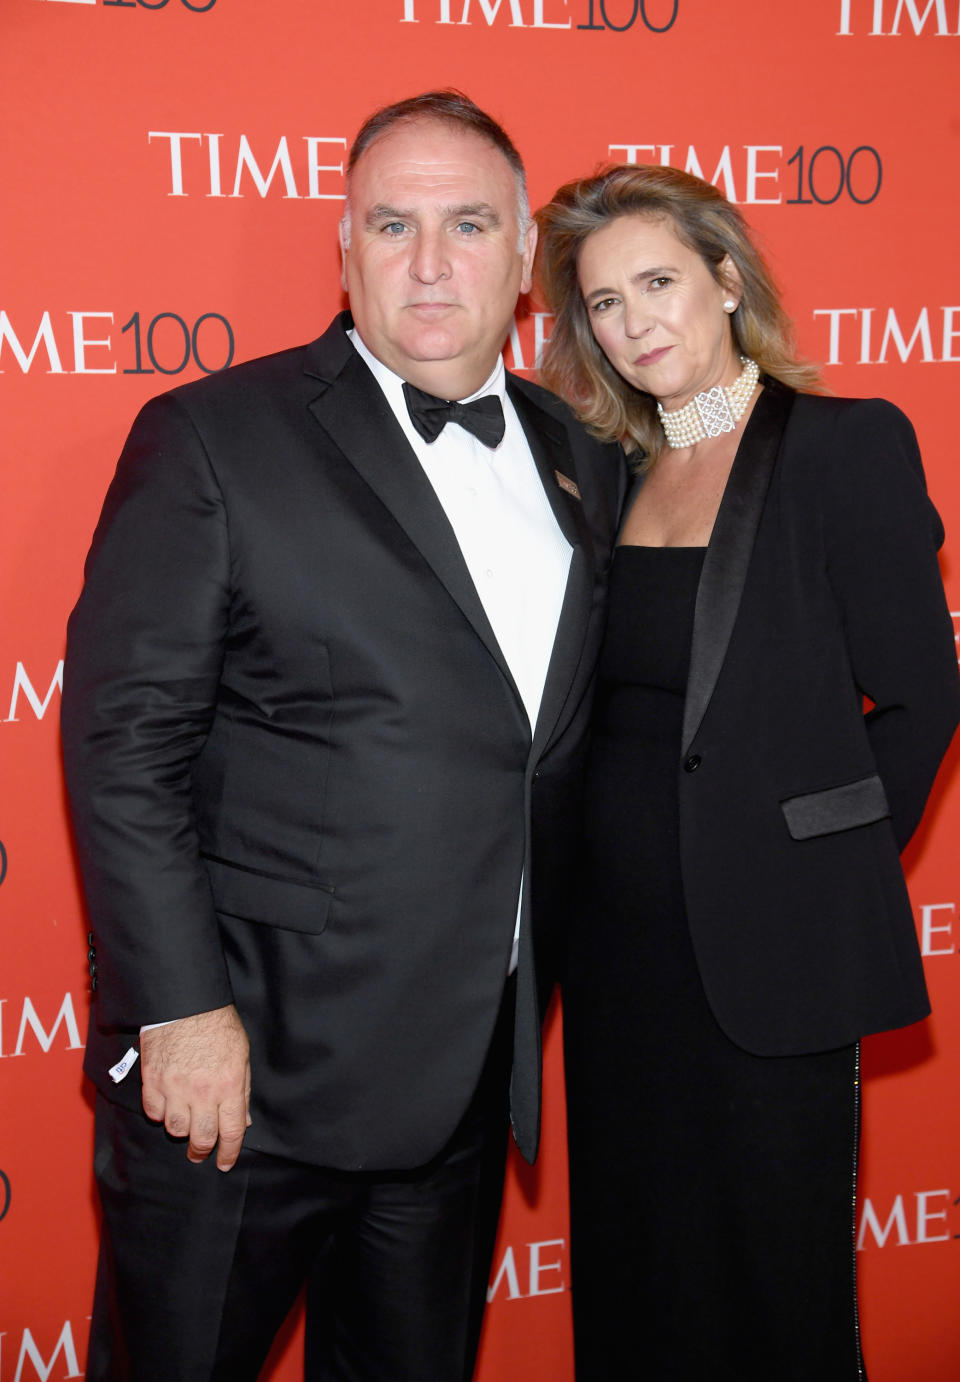 NEW YORK, NY - APRIL 24:  Chef Jose Andres and Patricia Fernandez de la cruz attend the 2018 Time 100 Gala at Jazz at Lincoln Center on April 24, 2018 in New York City.  (Photo by Dimitrios Kambouris/Getty Images for Time)